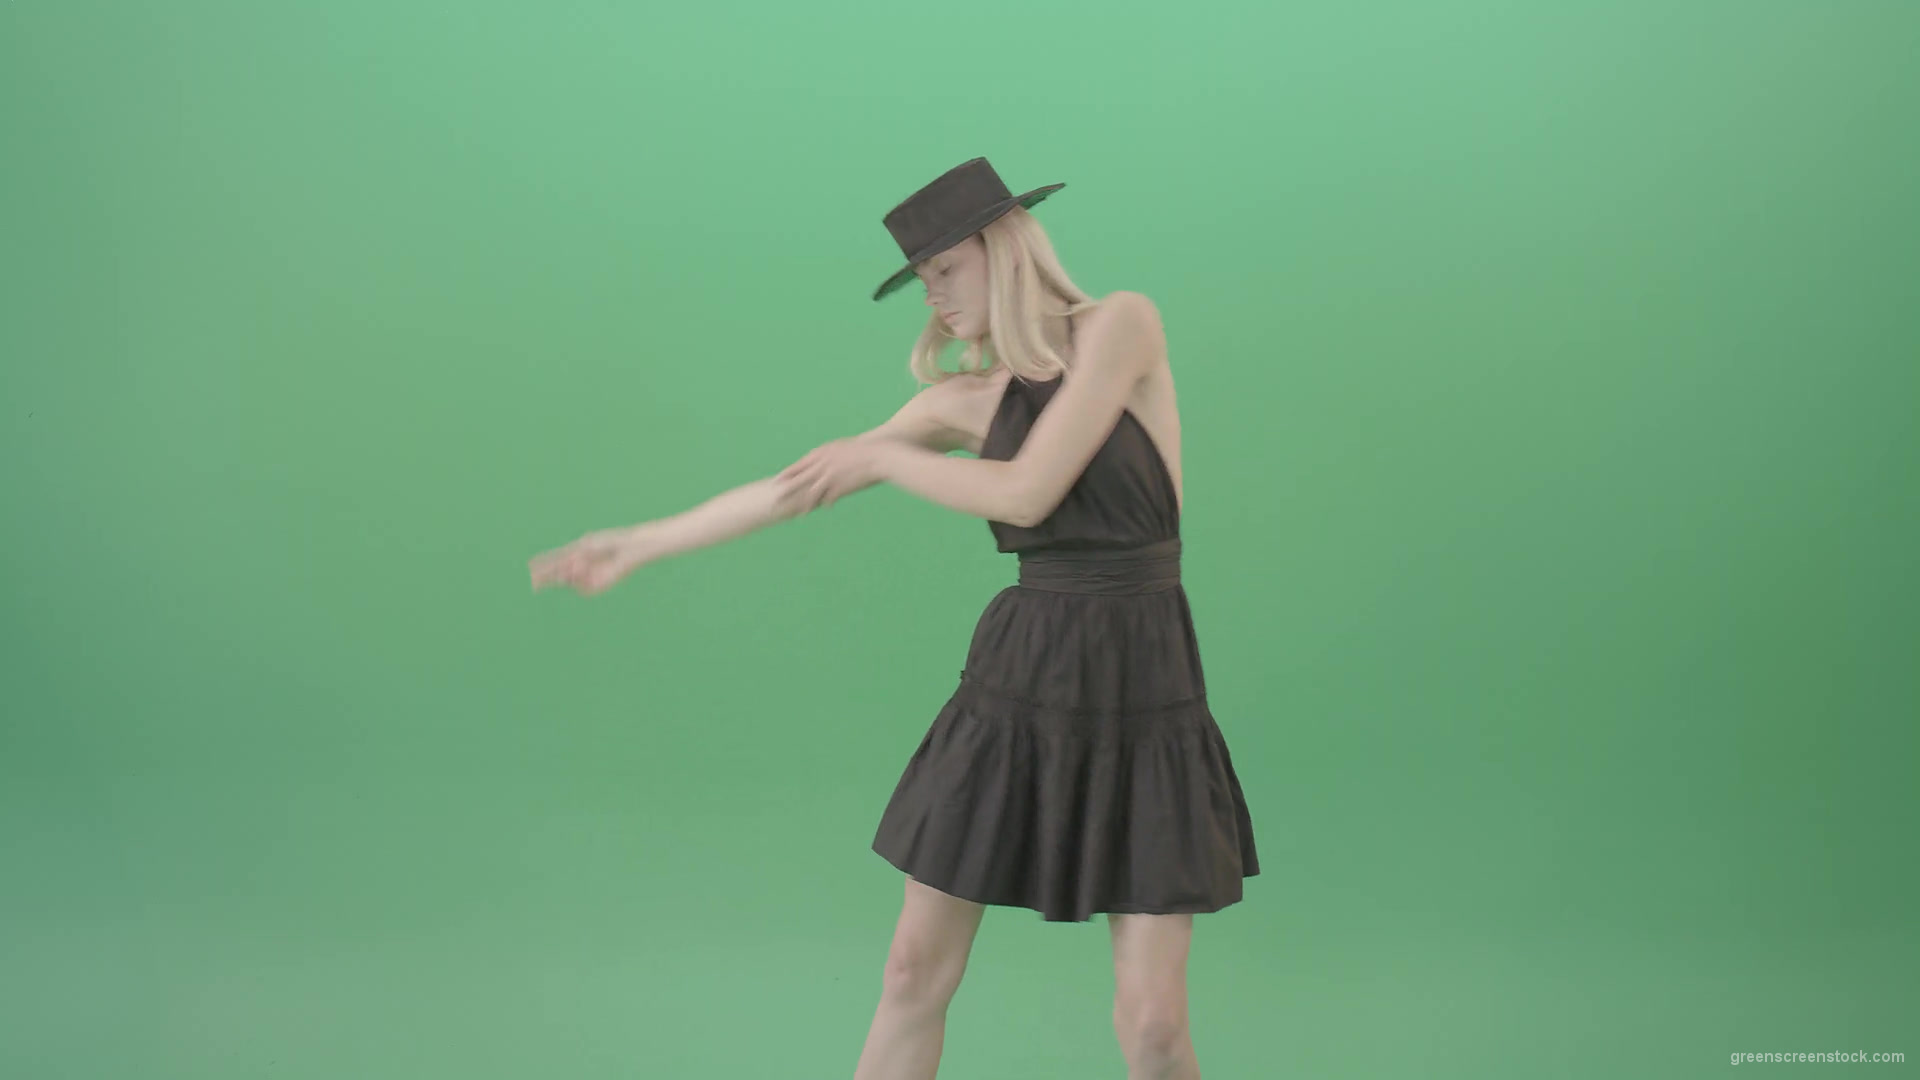 Video-Art-Fashion-Dance-by-Girl-in-black-outlet-and-dark-hat-on-green-screen-Video-Footage-1920_005 Green Screen Stock